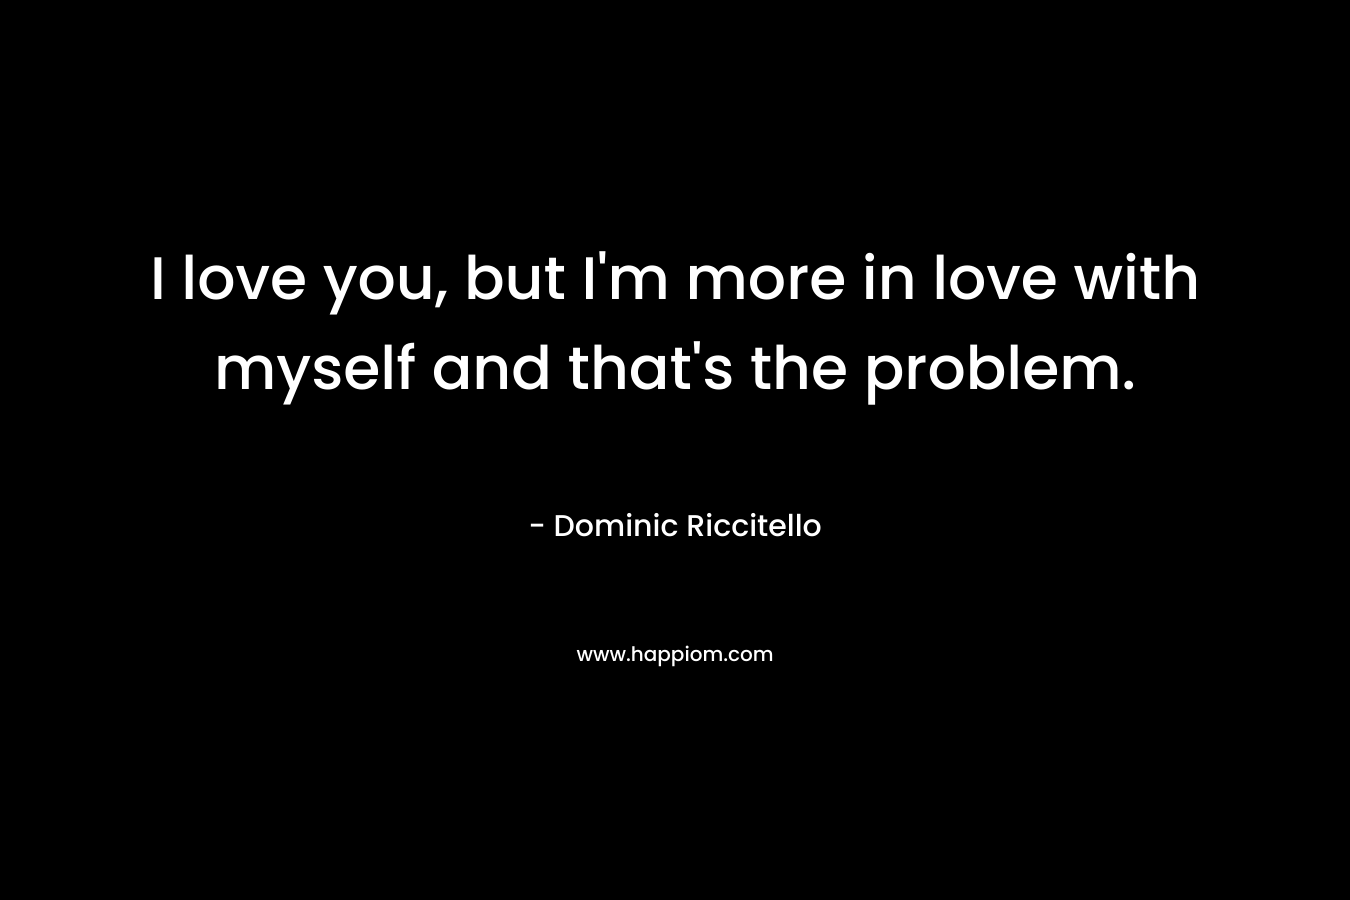 I love you, but I'm more in love with myself and that's the problem.